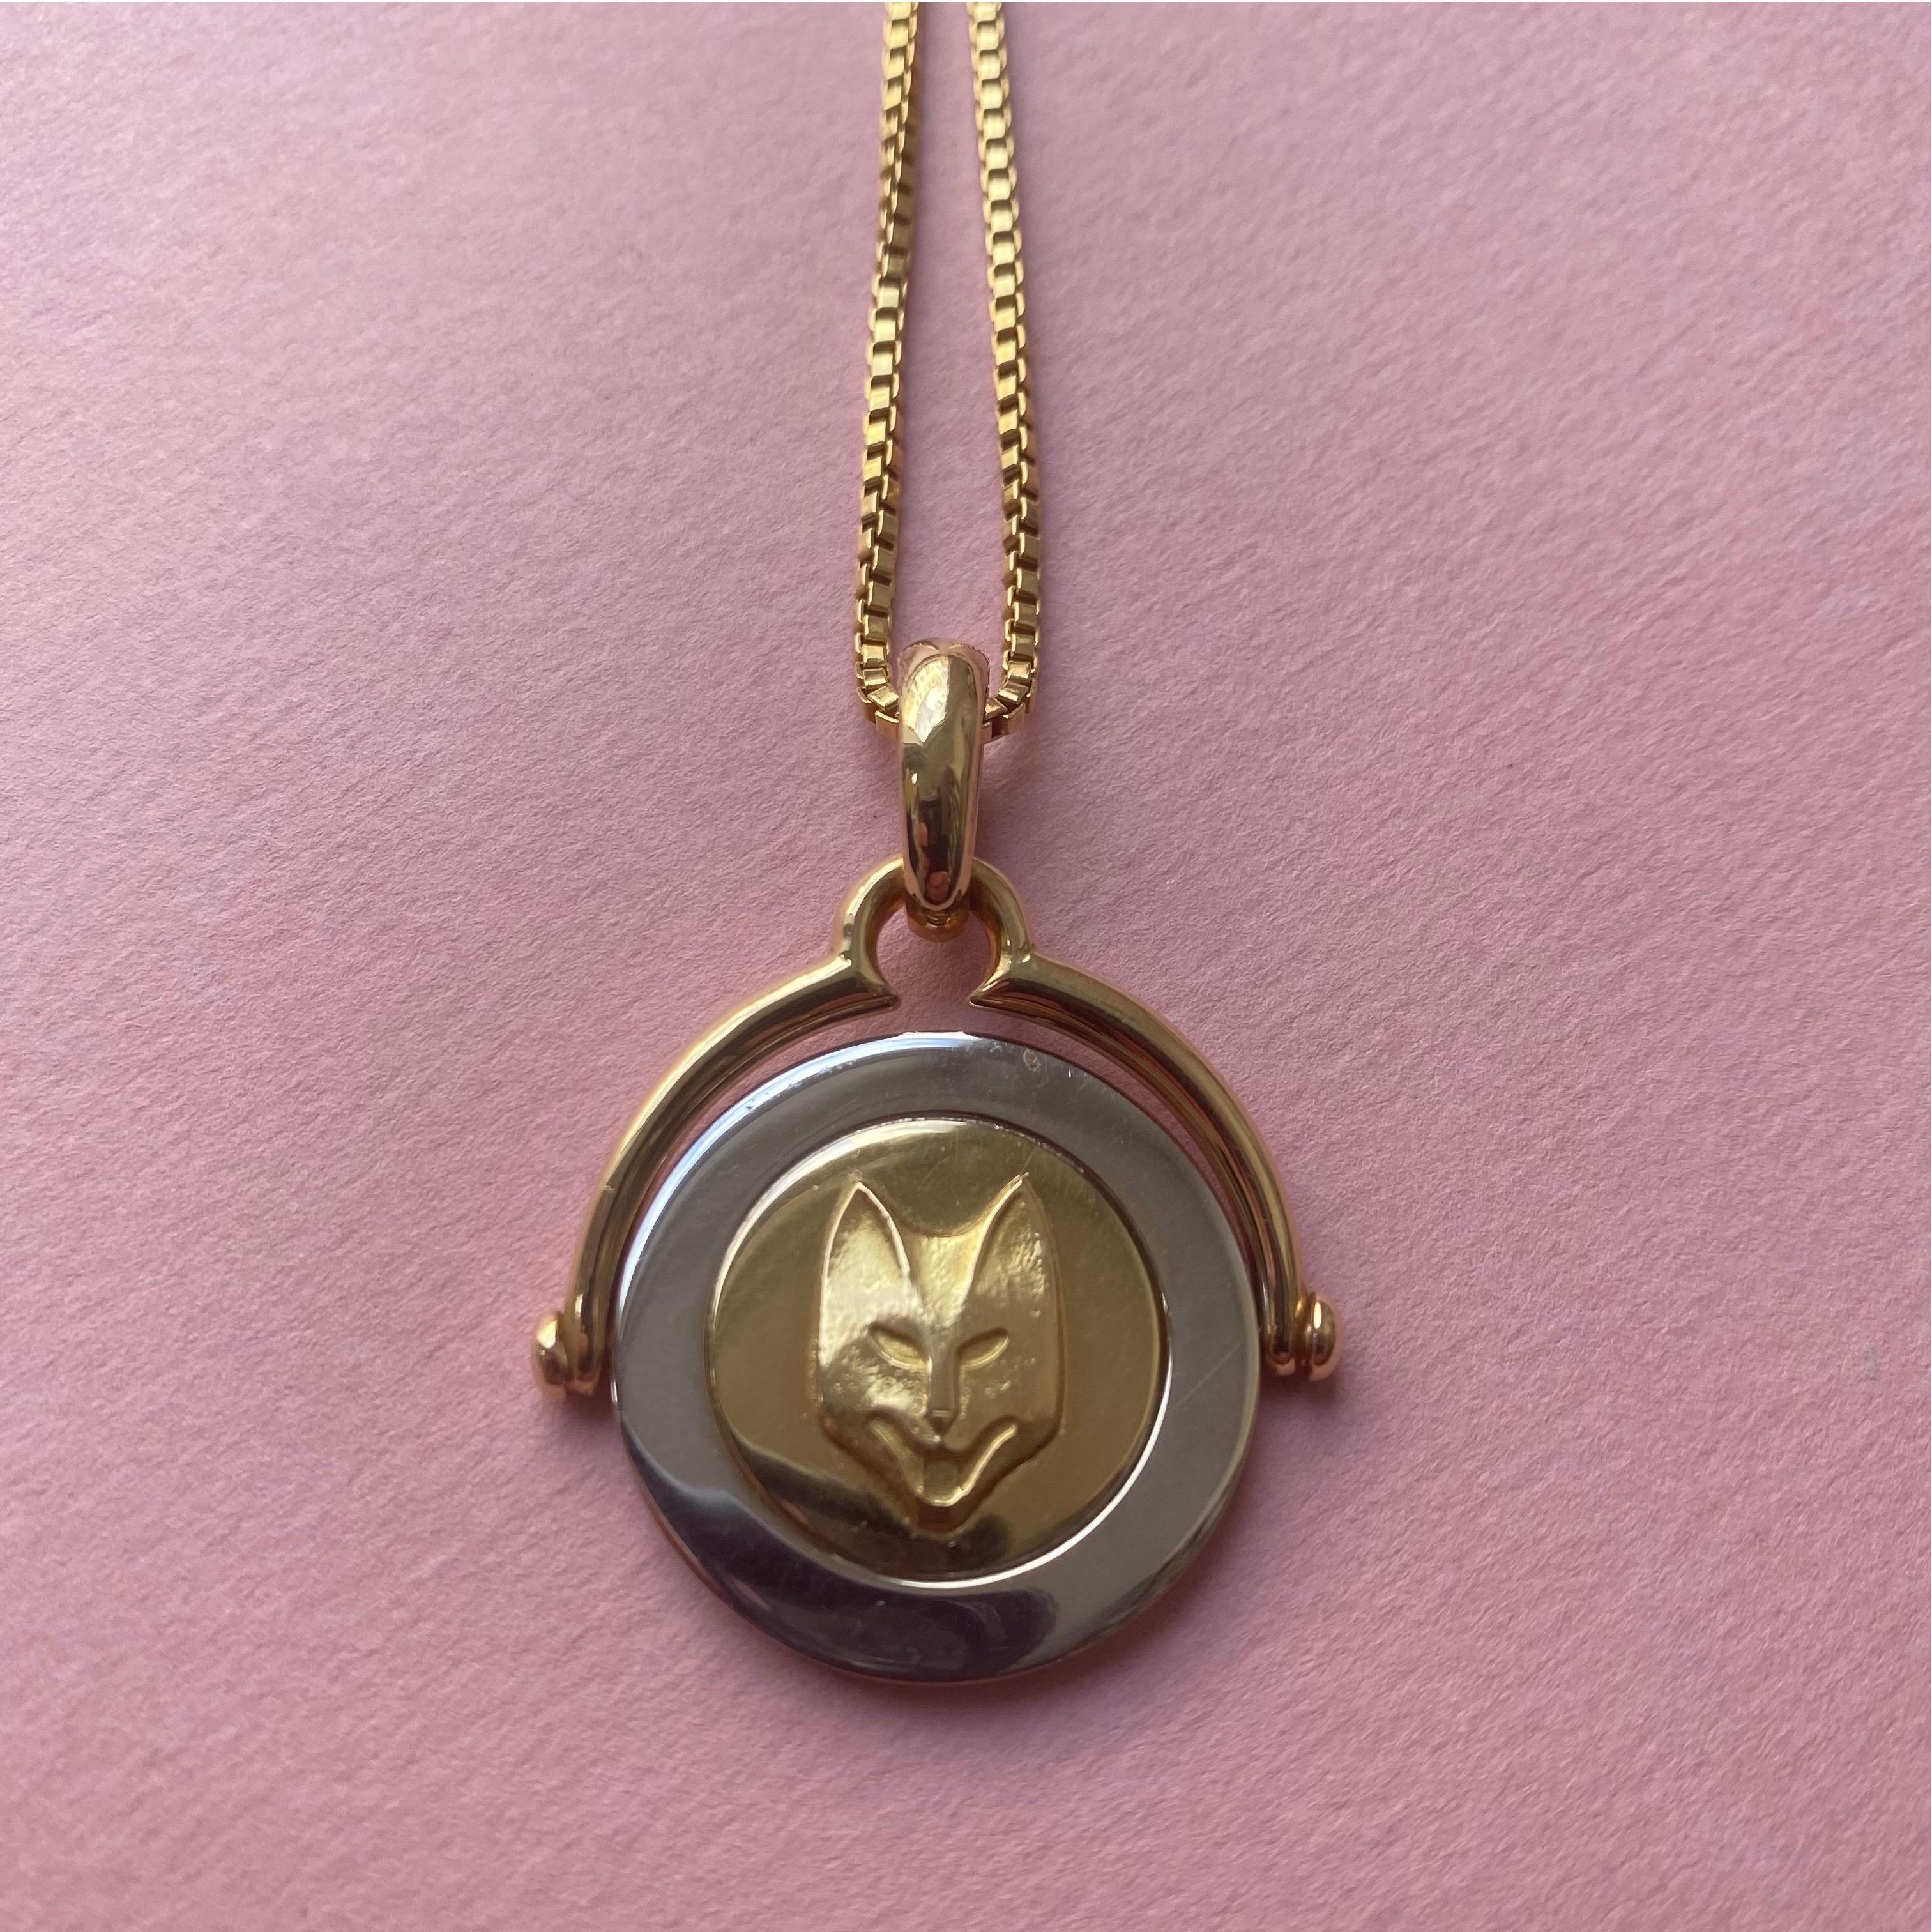 An 18 carat white and yellow gold Swivel pendant of a cat or a fox signed and made by Bulgari for Balthus in France.

weight: 33.8 grams including 18 carat gold chain
size: 4 x 3 cm